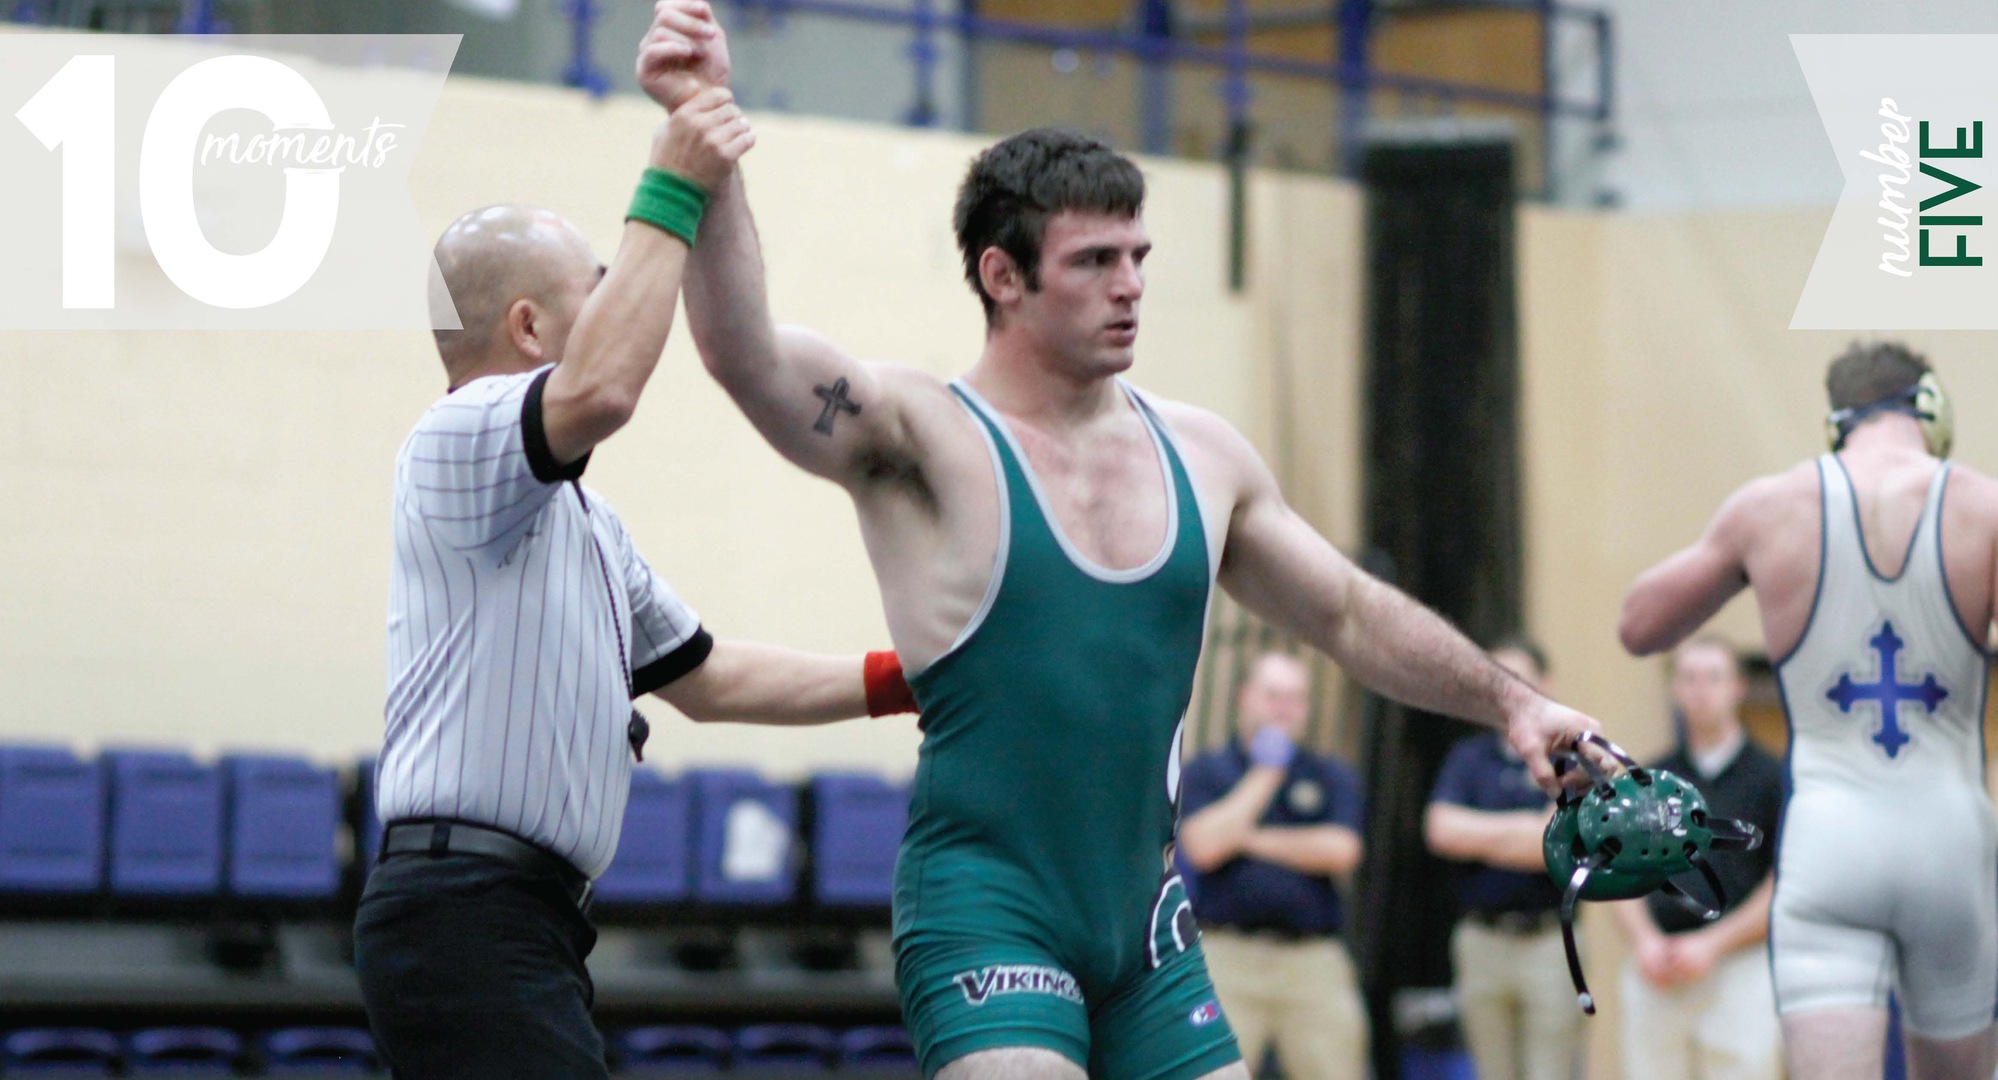 2016-17 CSU Athletics Top 10 Moments | #5 Corba Wins Two Matches at NCAA Wrestling Championships